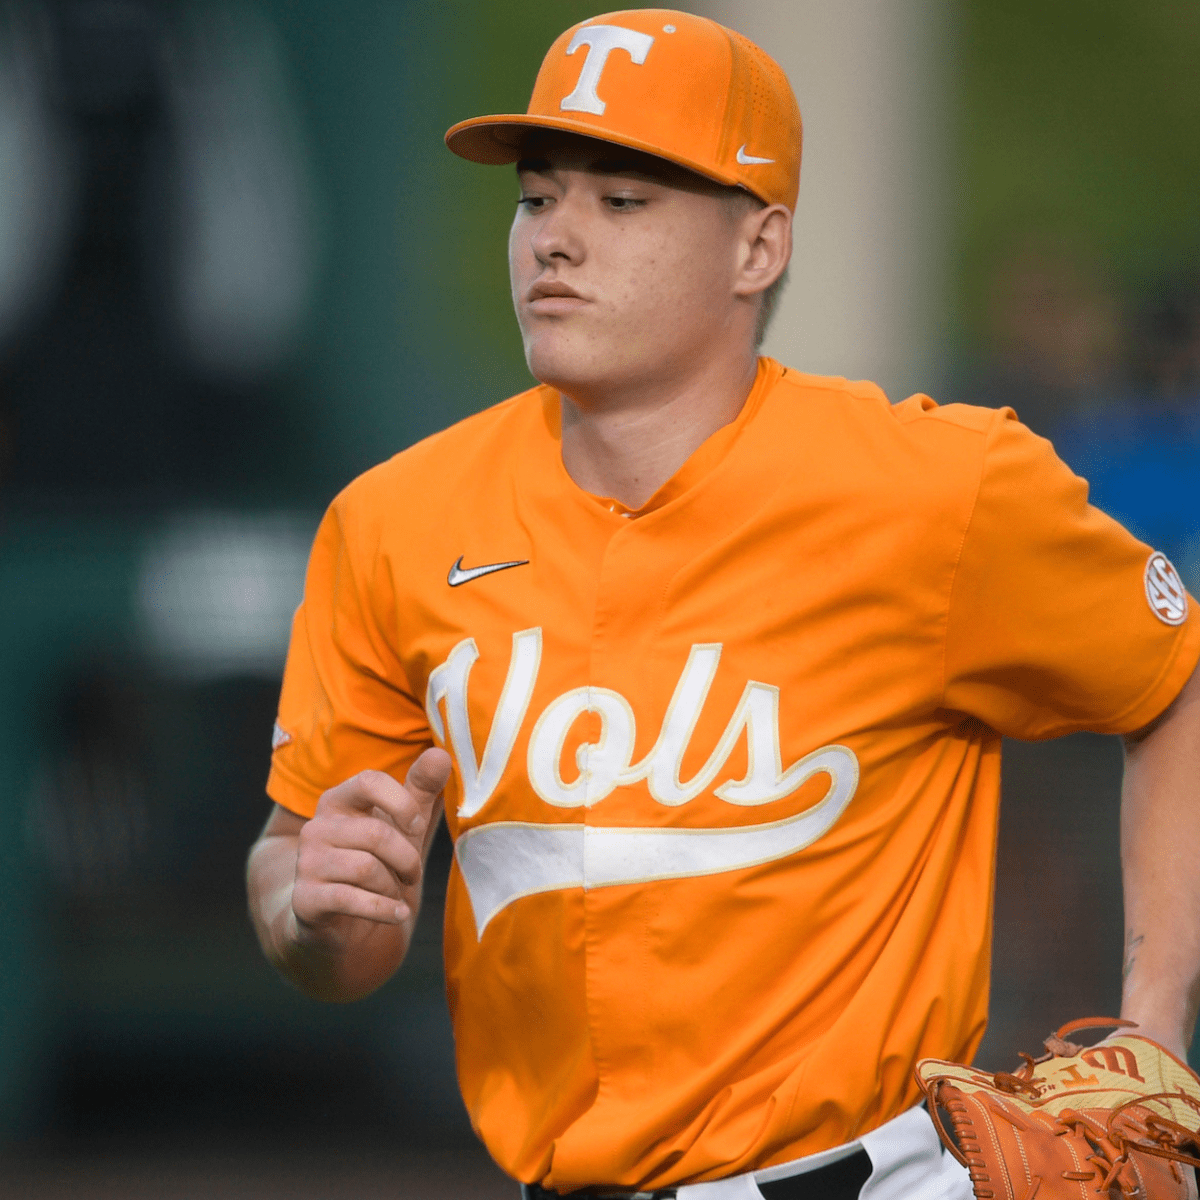 Preseason All-American pitcher Blade Tidwell sidelined by shoulder